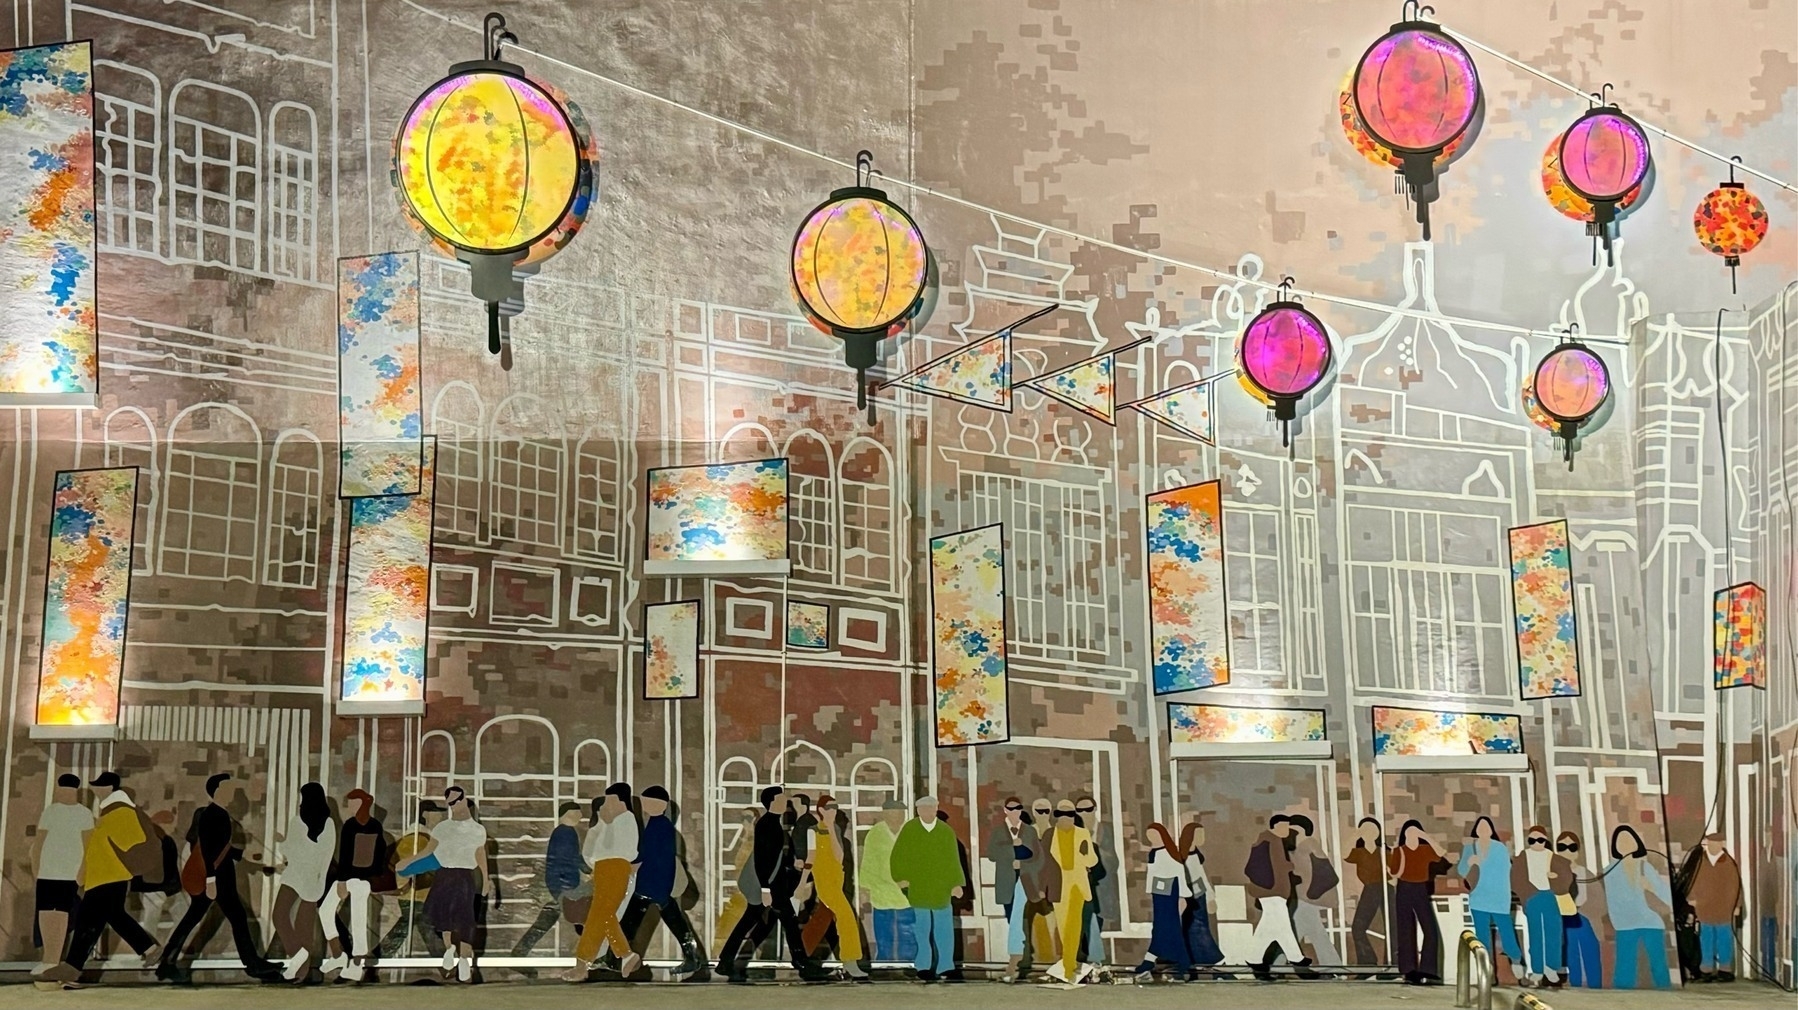 Mural of a street scene, with hues of gold, and several yellow and red lanterns overhead appearing as though lit.